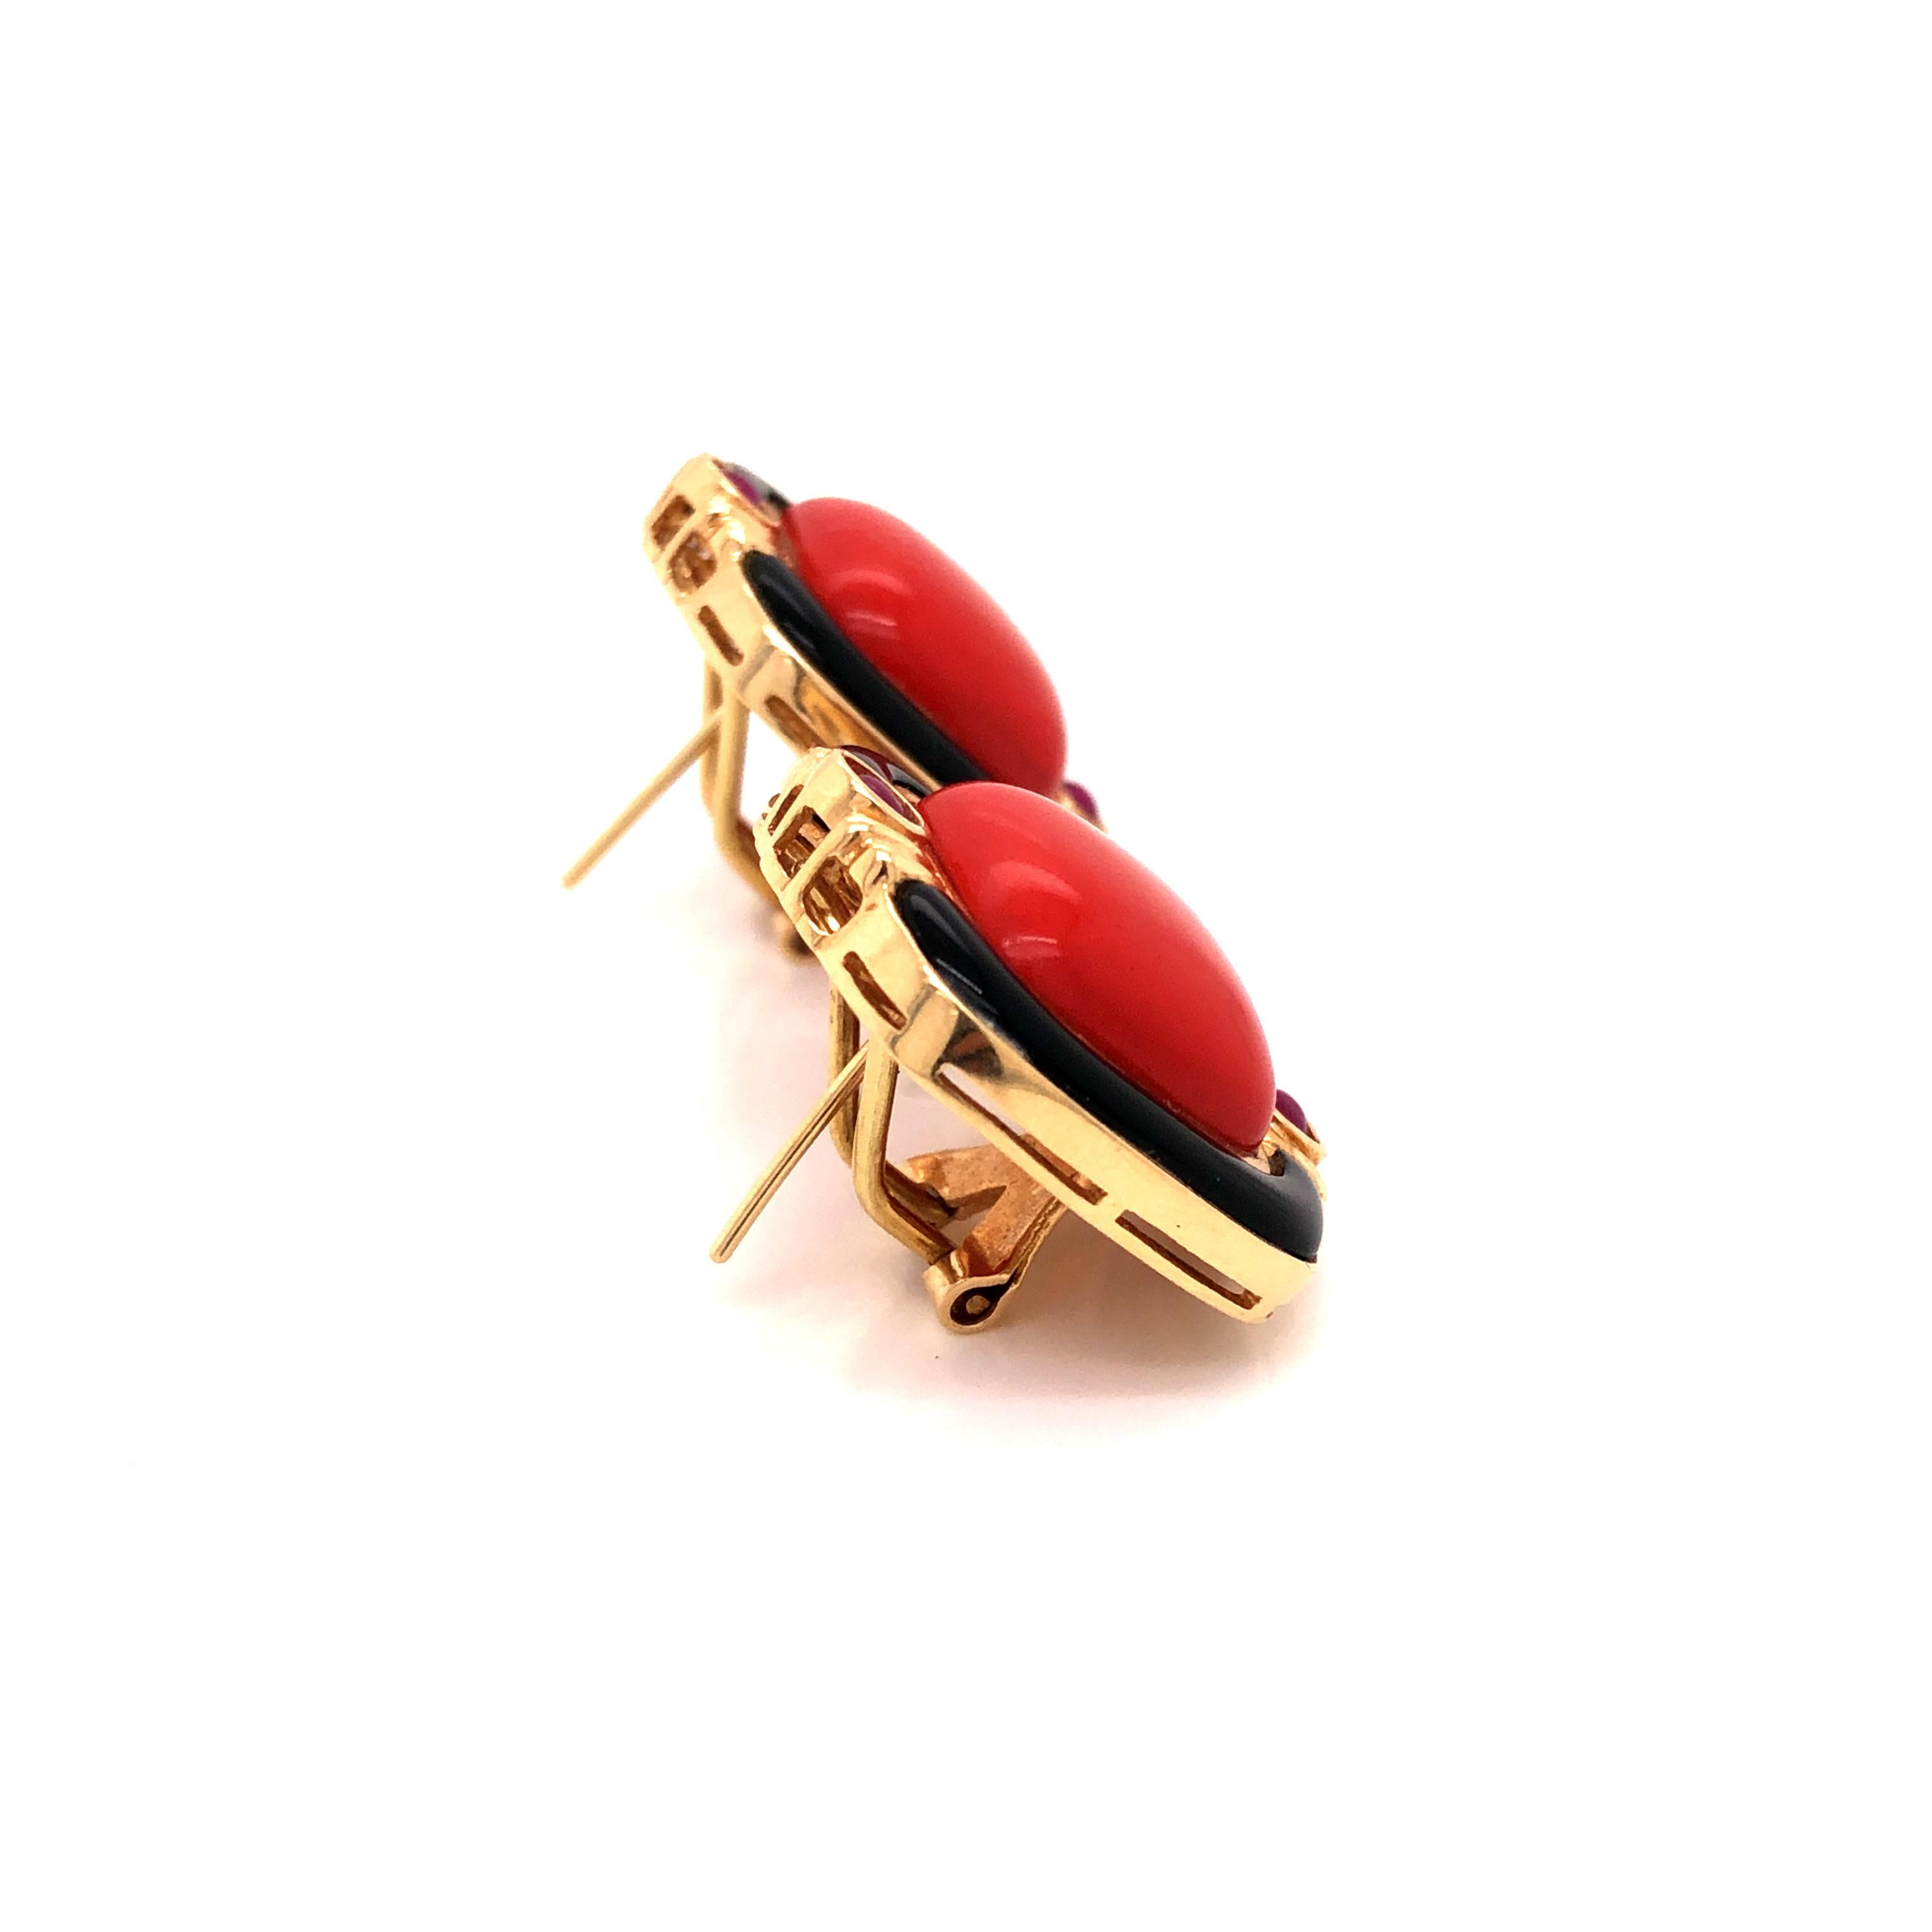 A pair of 14K yellow gold earrings featuring coral cabochons surrounded by polished onyx panels and round ruby cabochons.

Stone: Coral, Ruby

Metal: 14K Yellow Gold

Size: 7/8